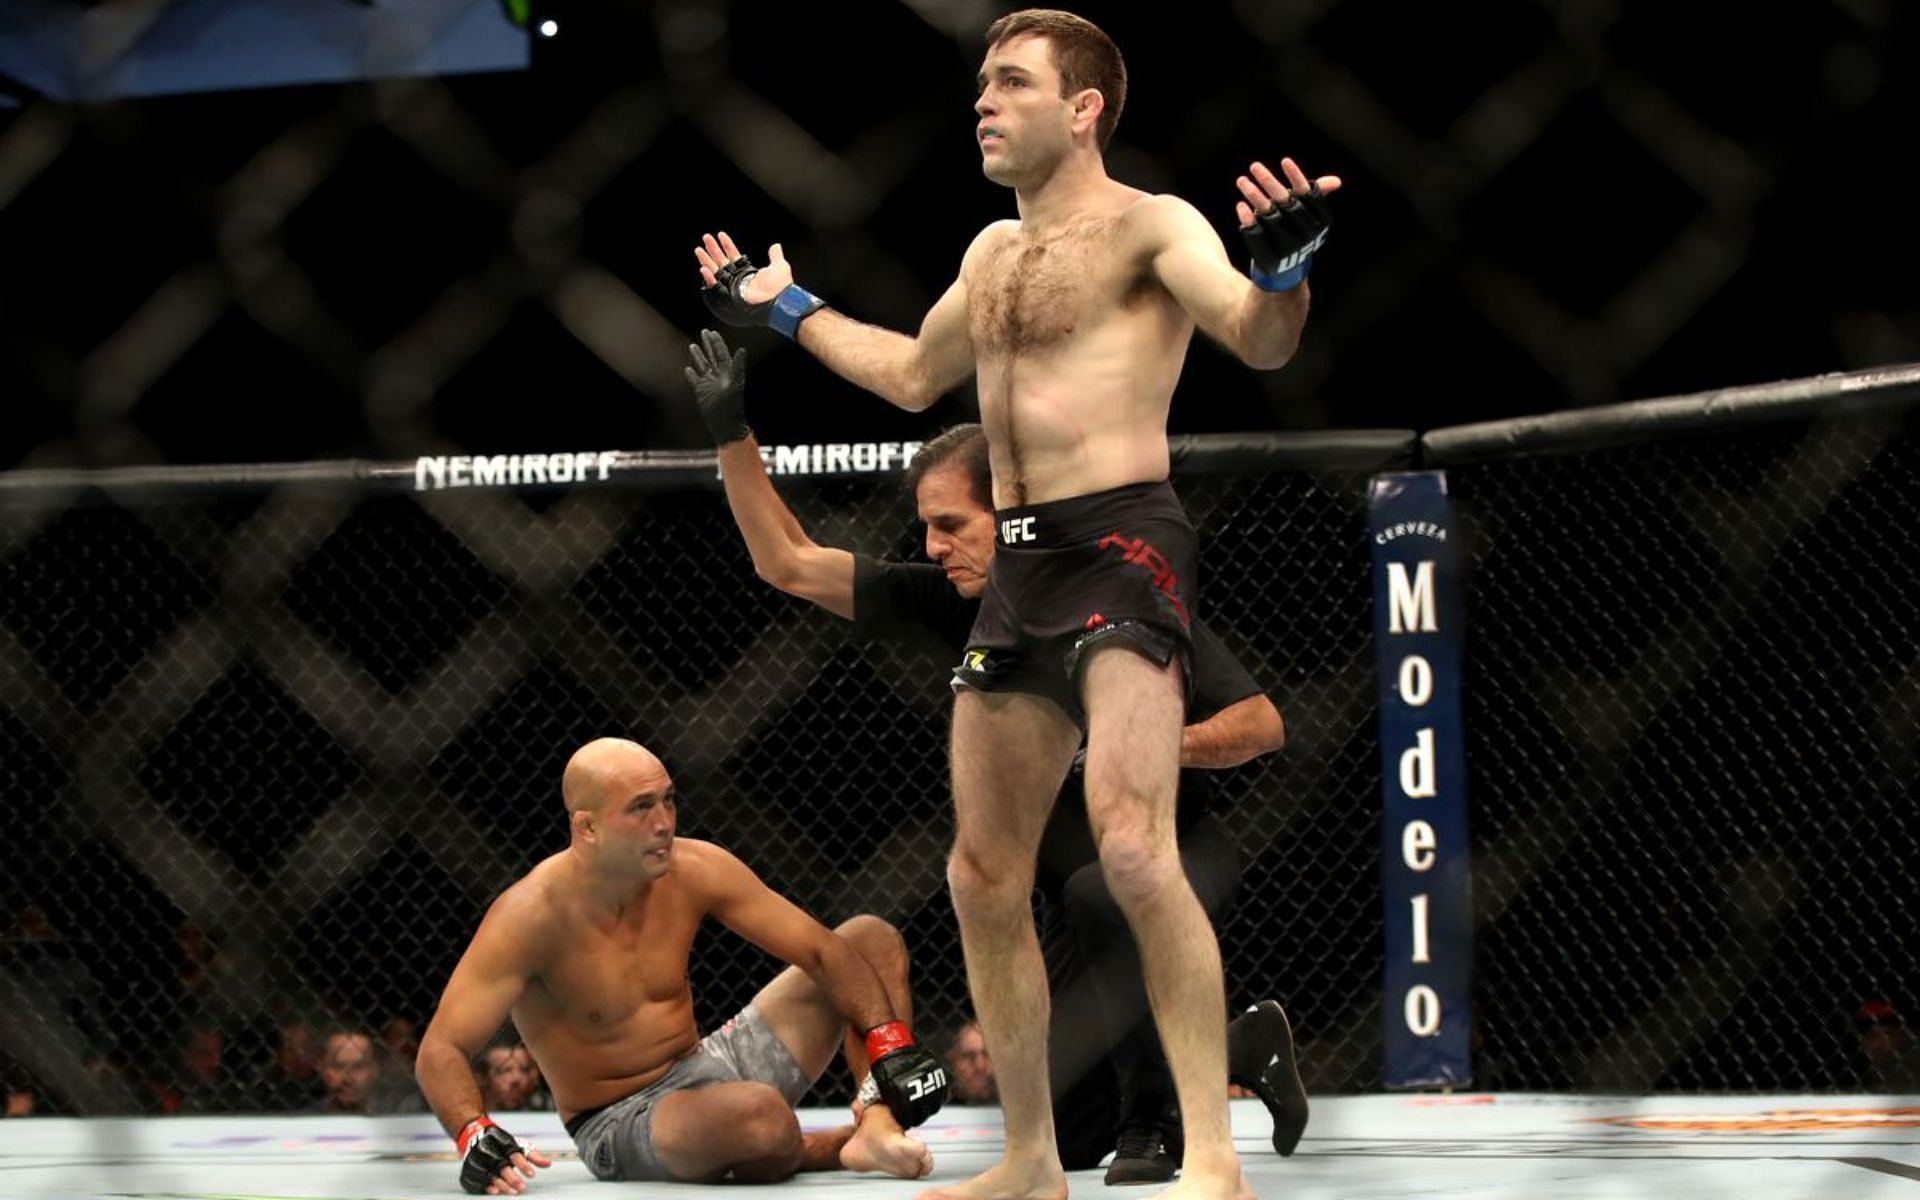 BJ Penn suffered a terrible loss to Ryan Hall towards the end of his career